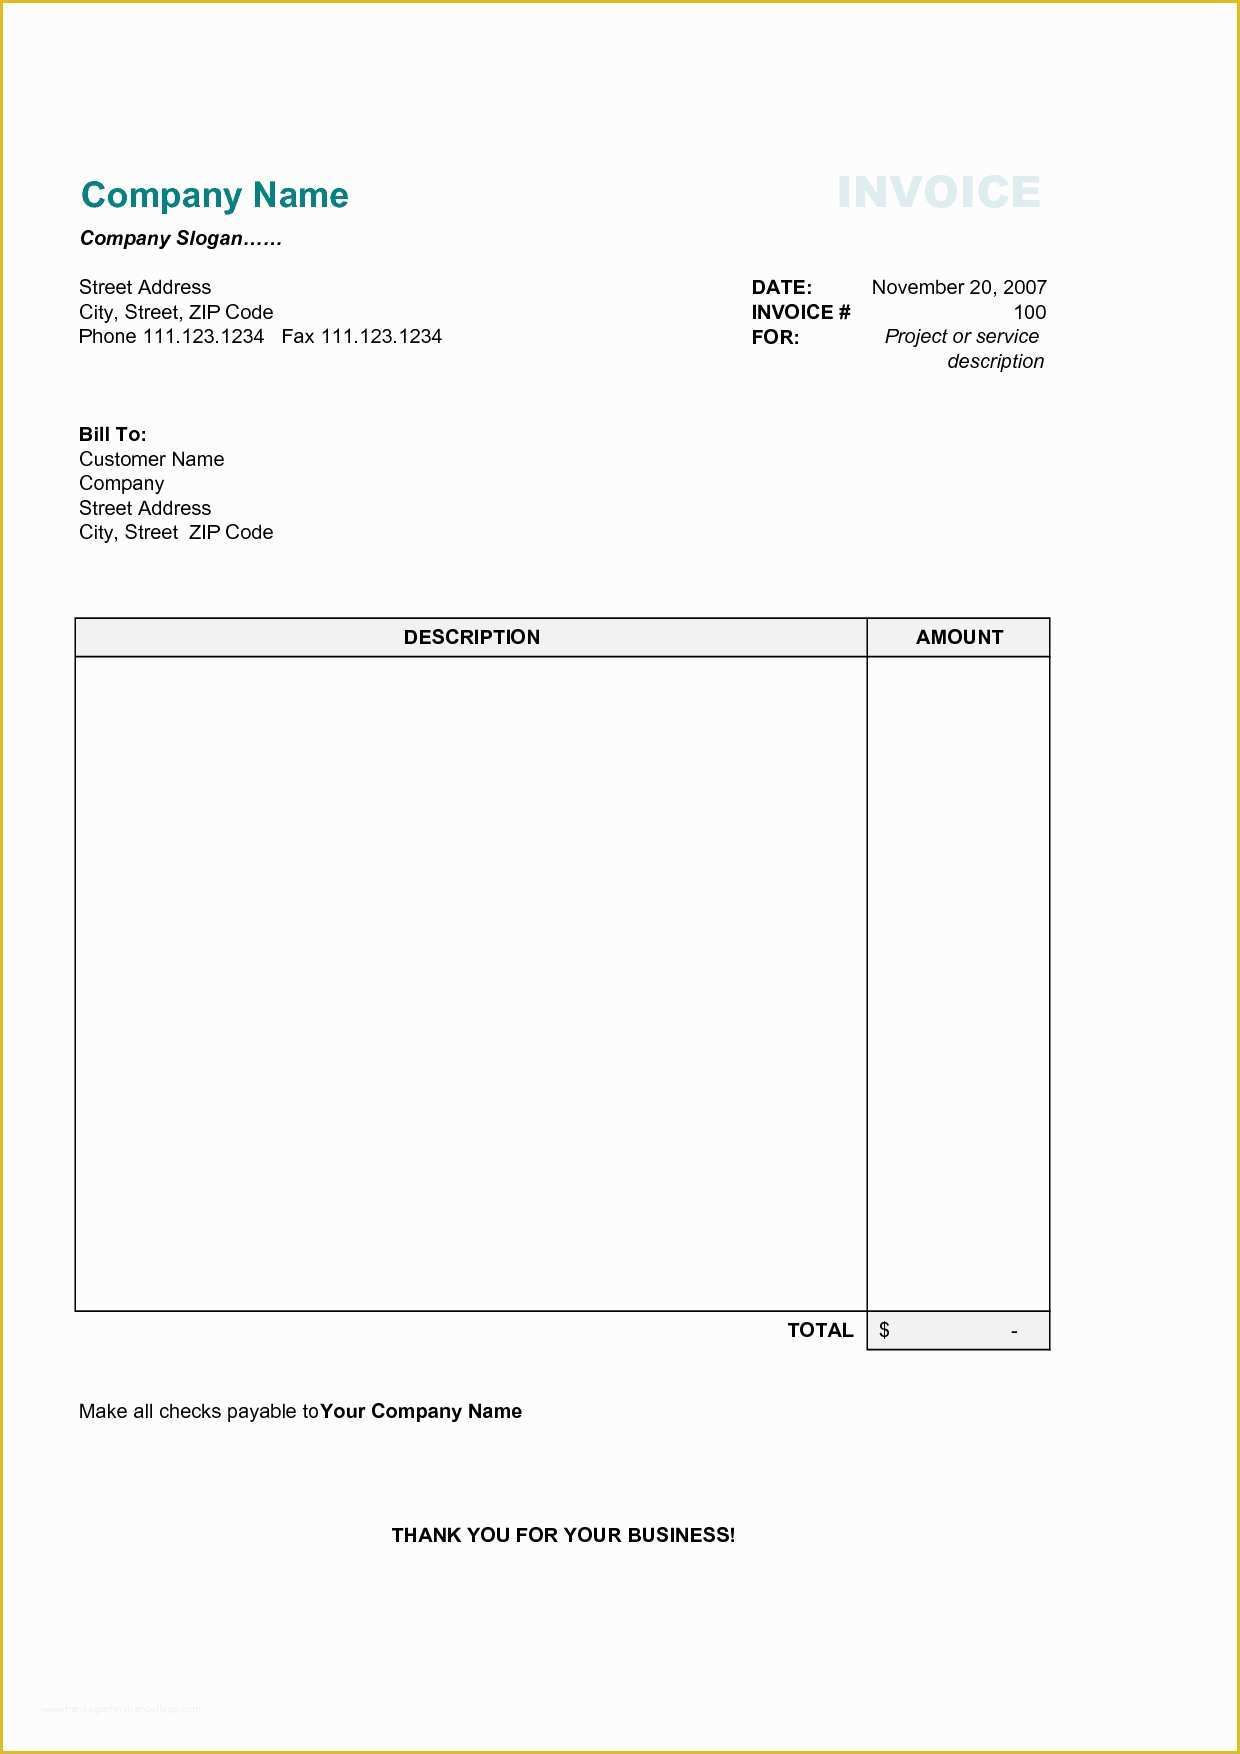 Free Personal Invoice Template Of Business Invoice Template Free Invoice Template Ideas